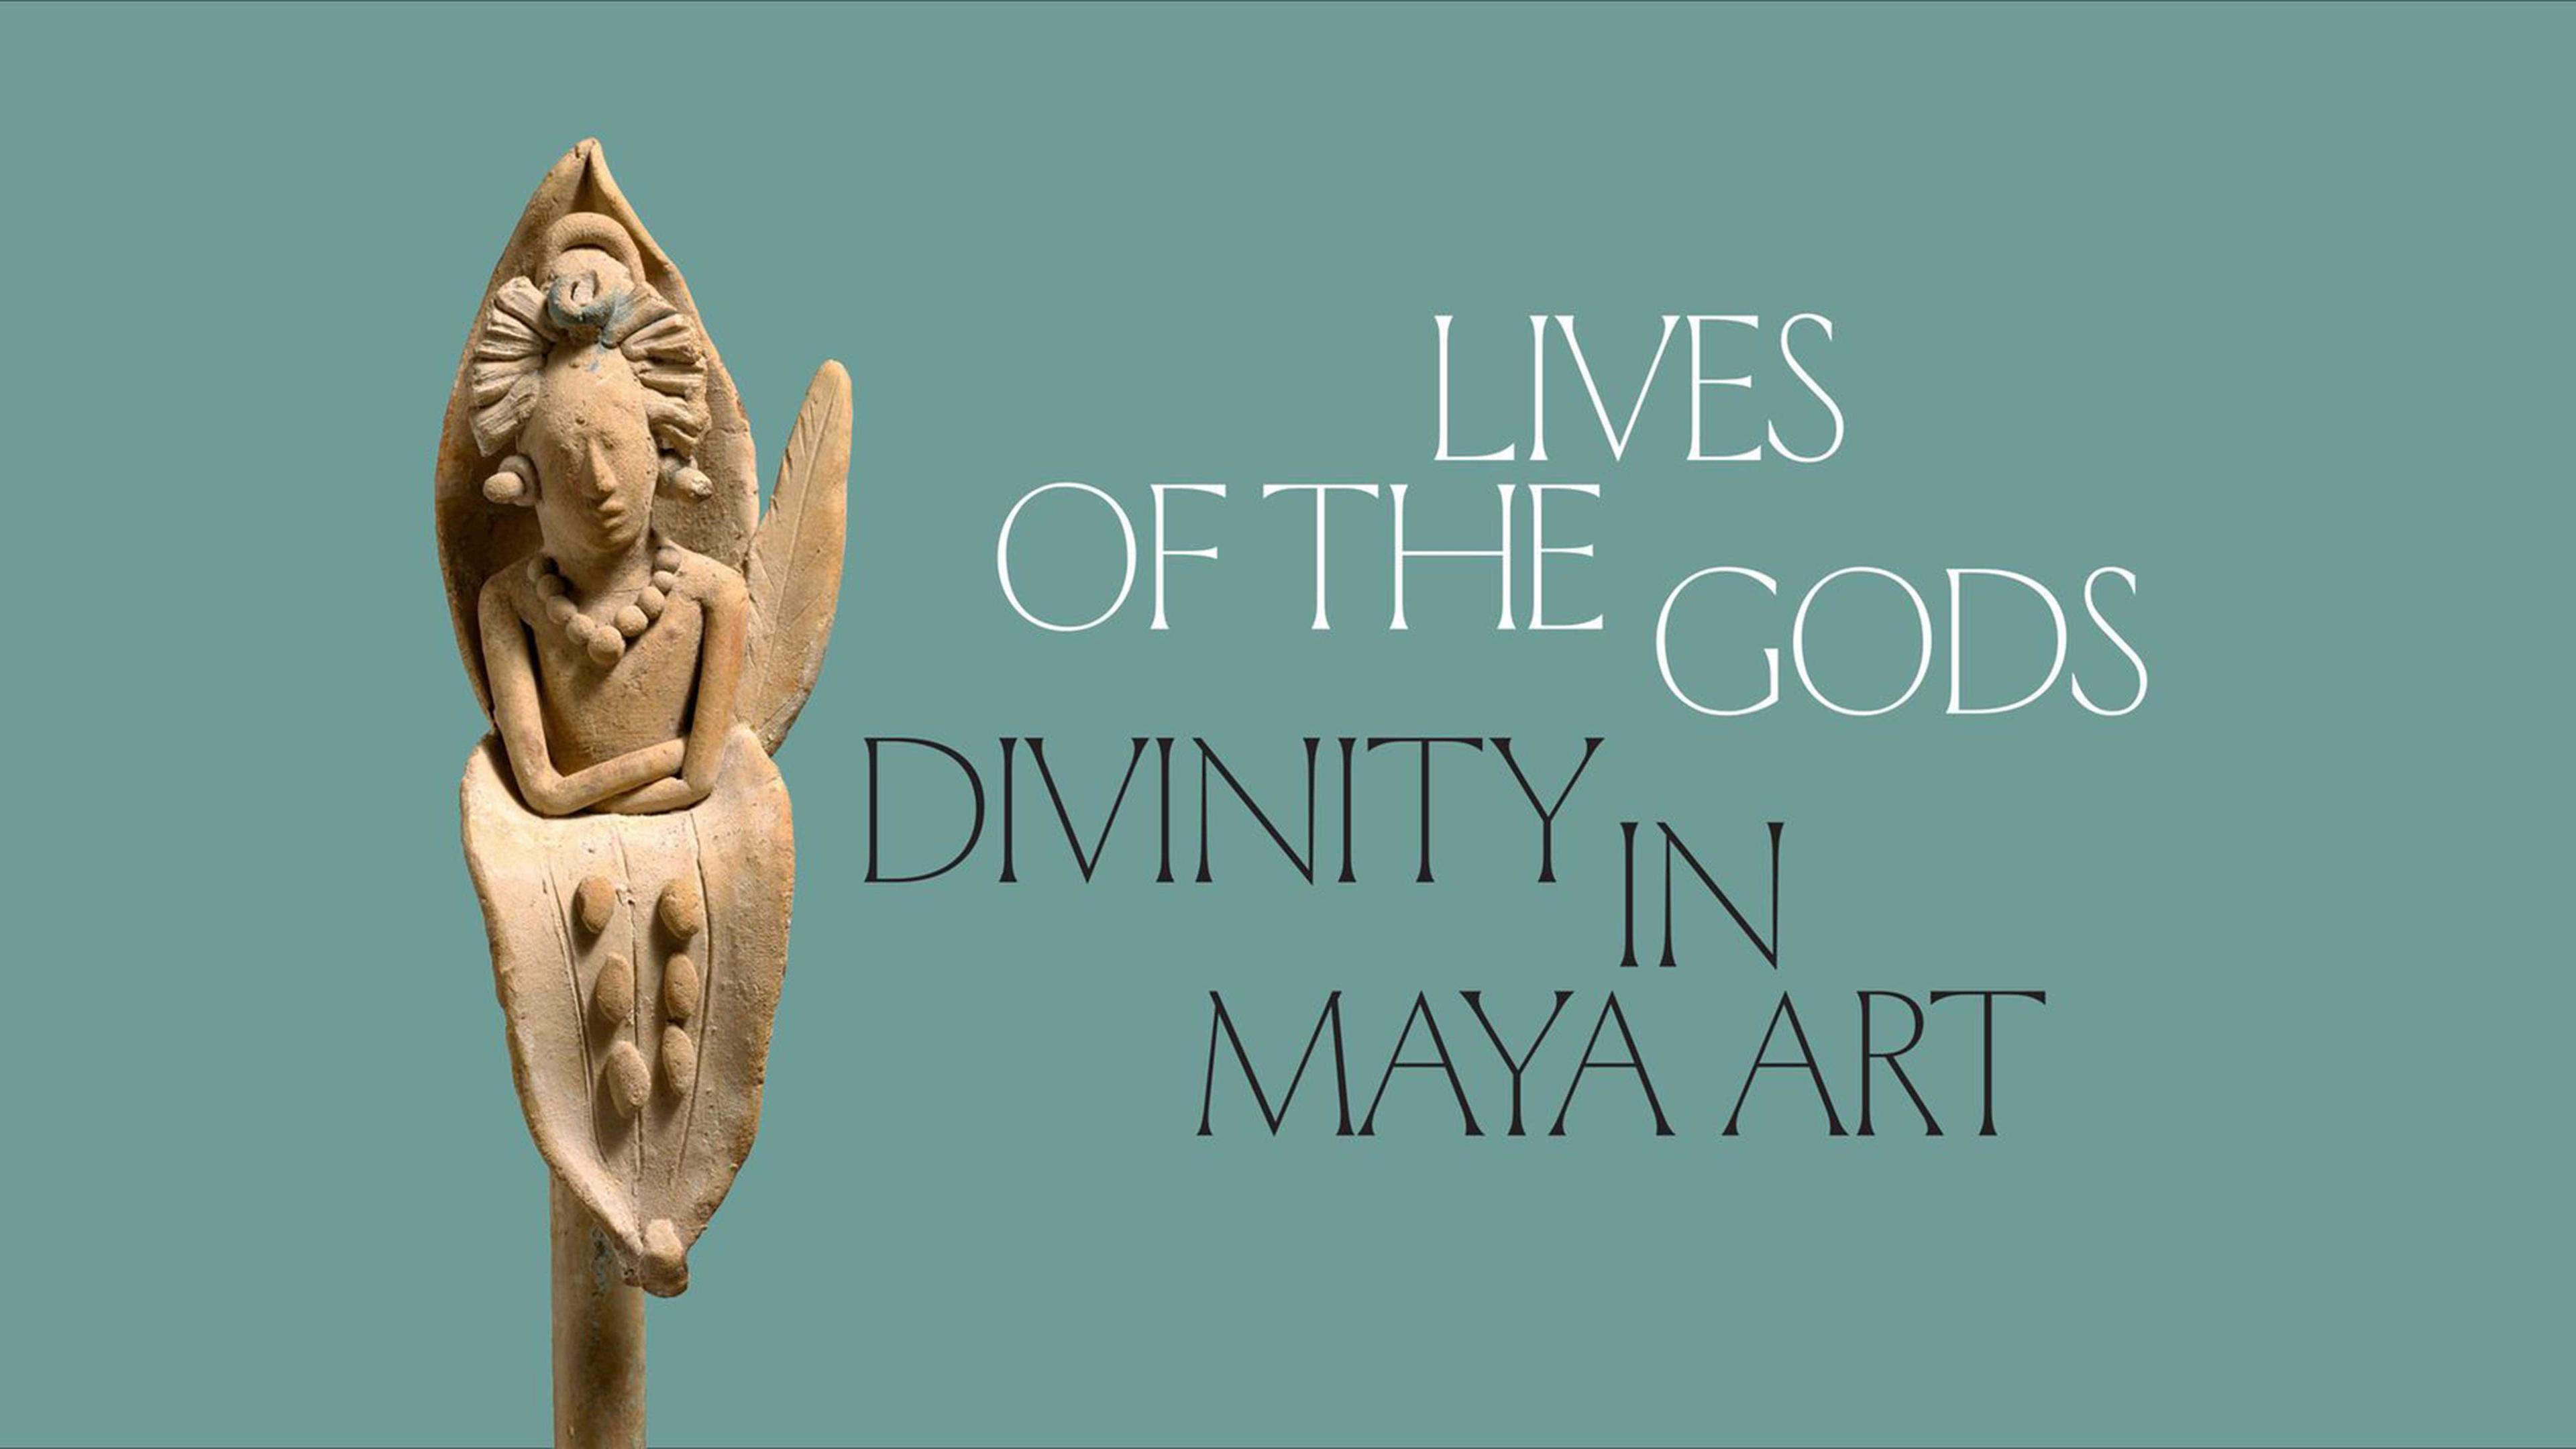 Lives of the Gods Divinity in Maya Art